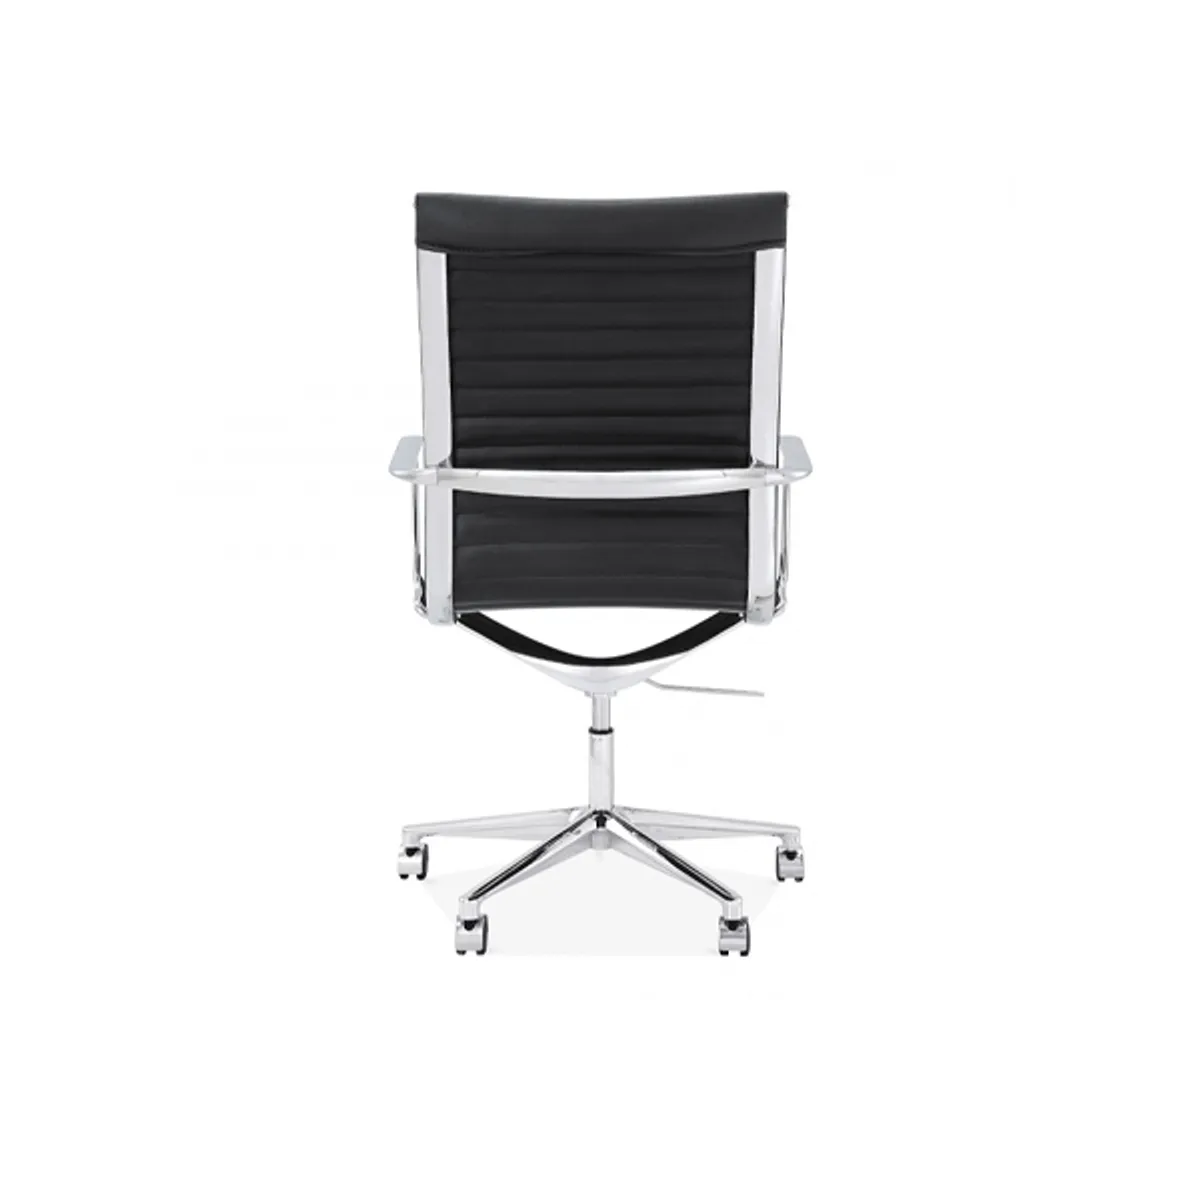 Staple task chair Inside Out Contracts5